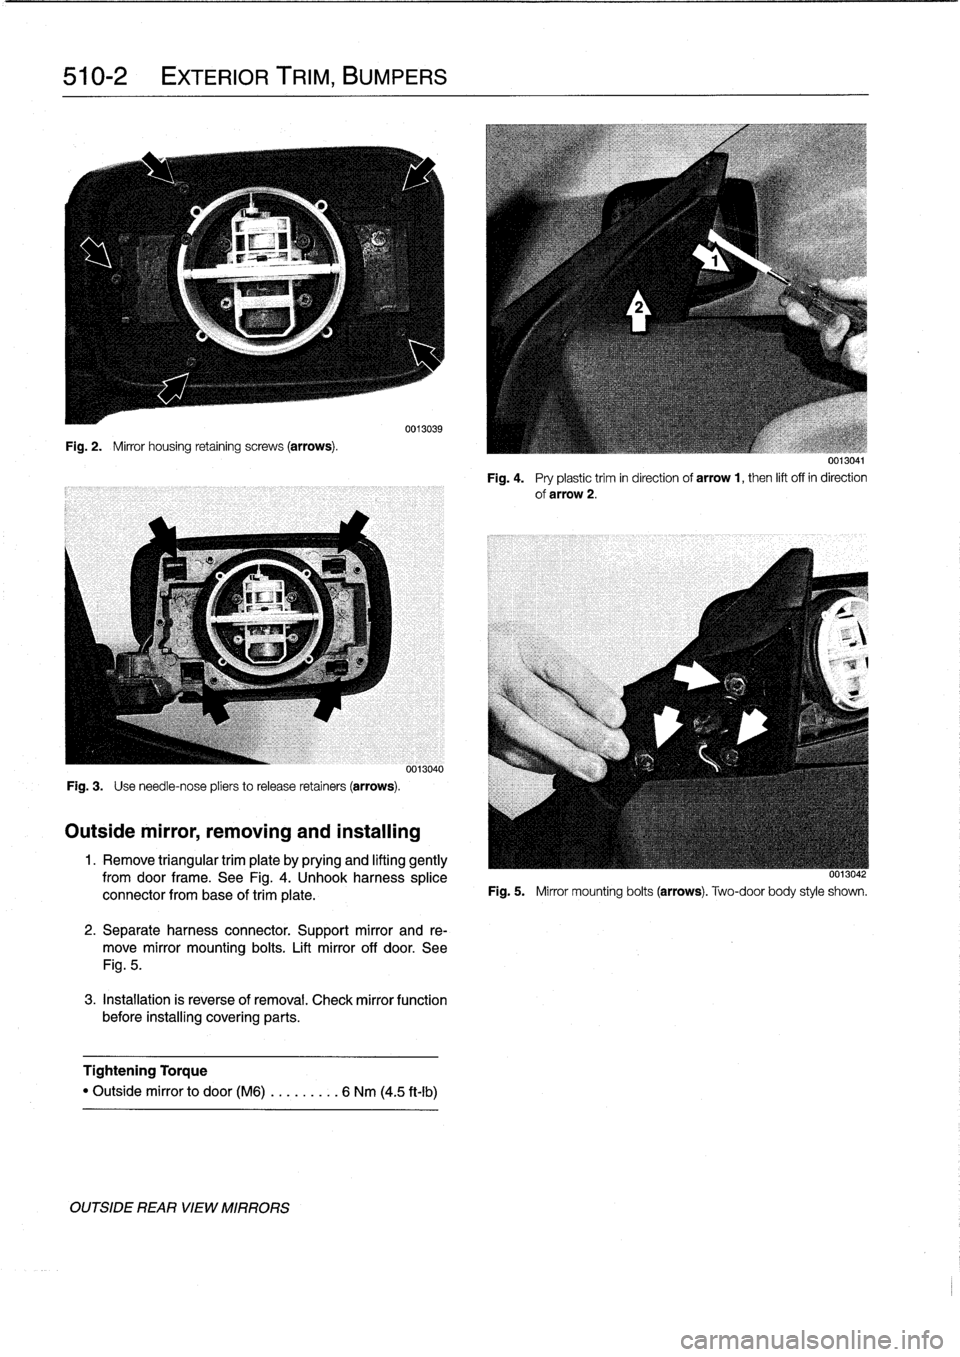 BMW 328i 1998 E36 Workshop Manual 
510-2

	

EXTERIOR
TRIIVI,
BUMPERS

Fig
.
2
.

	

Mirror
housing
retaining
screws
(arrows)
.

Fig
.
3
.

	

Use
need1e-nose
pliers
to
release
retainers
(arrows)
.

Outside
mirror,
removing
and
instal